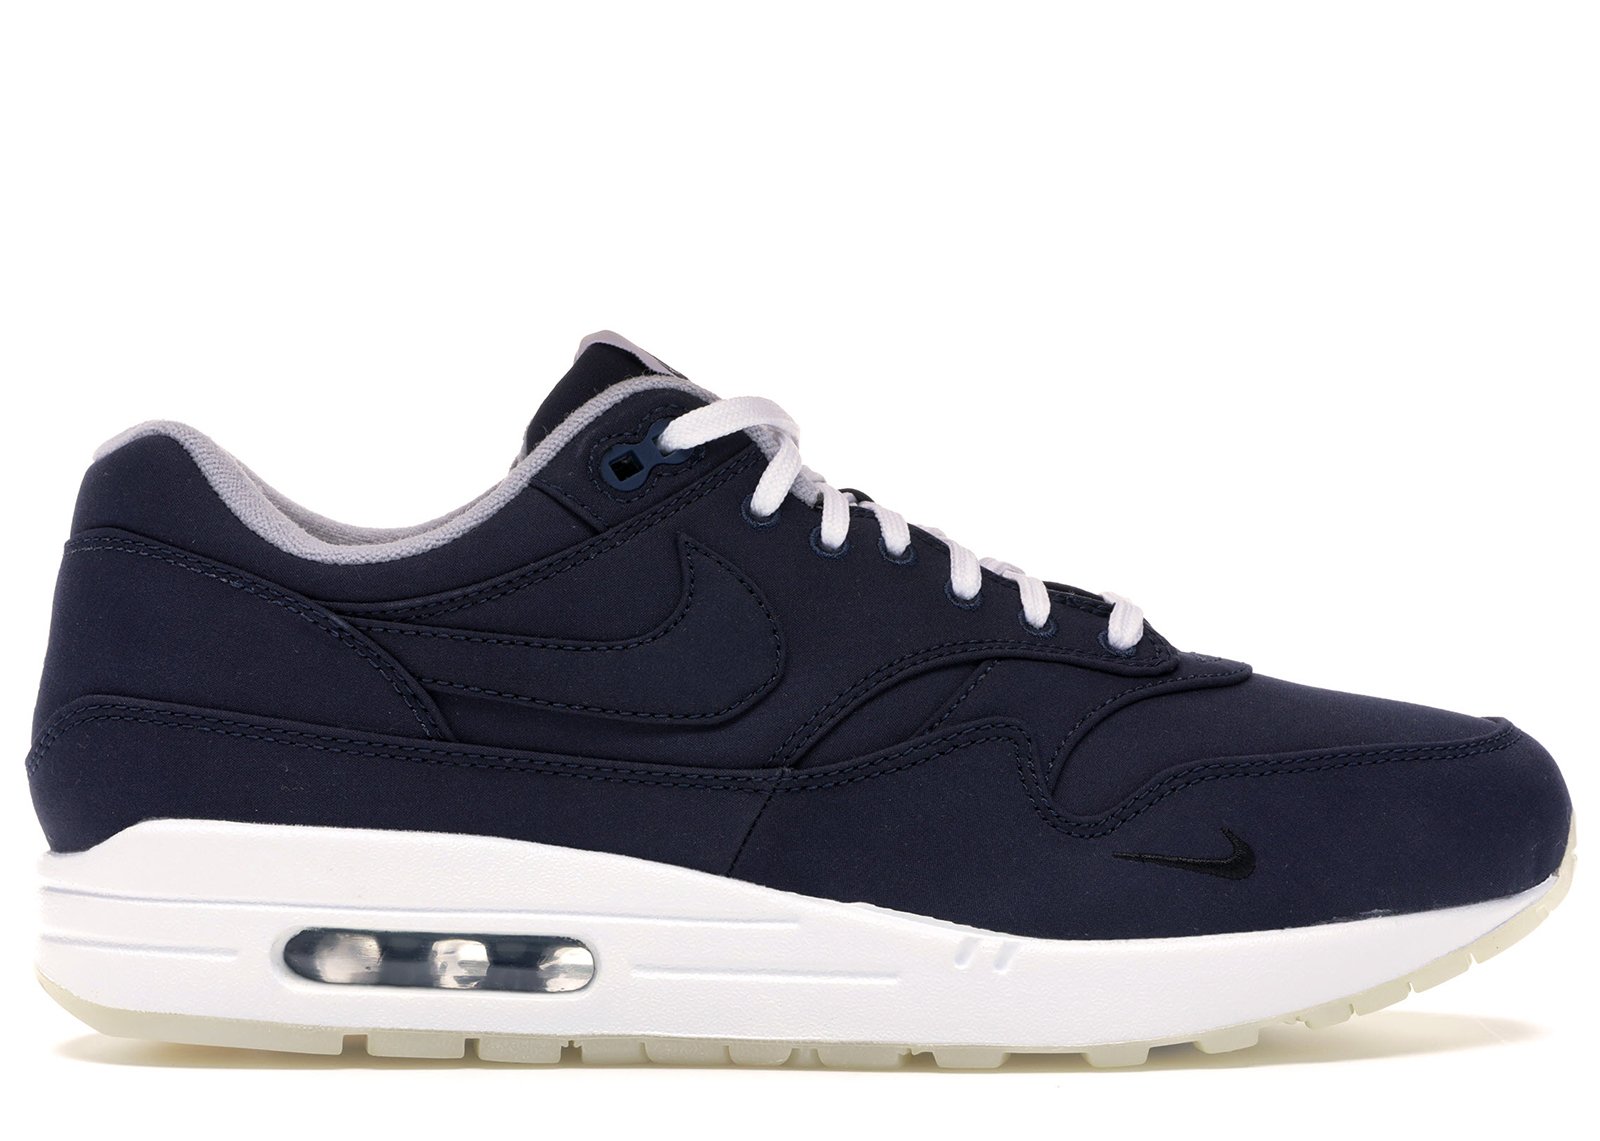 Nike Air Max 1 Dover Street Market Ventile (Brave Blue) sneakers